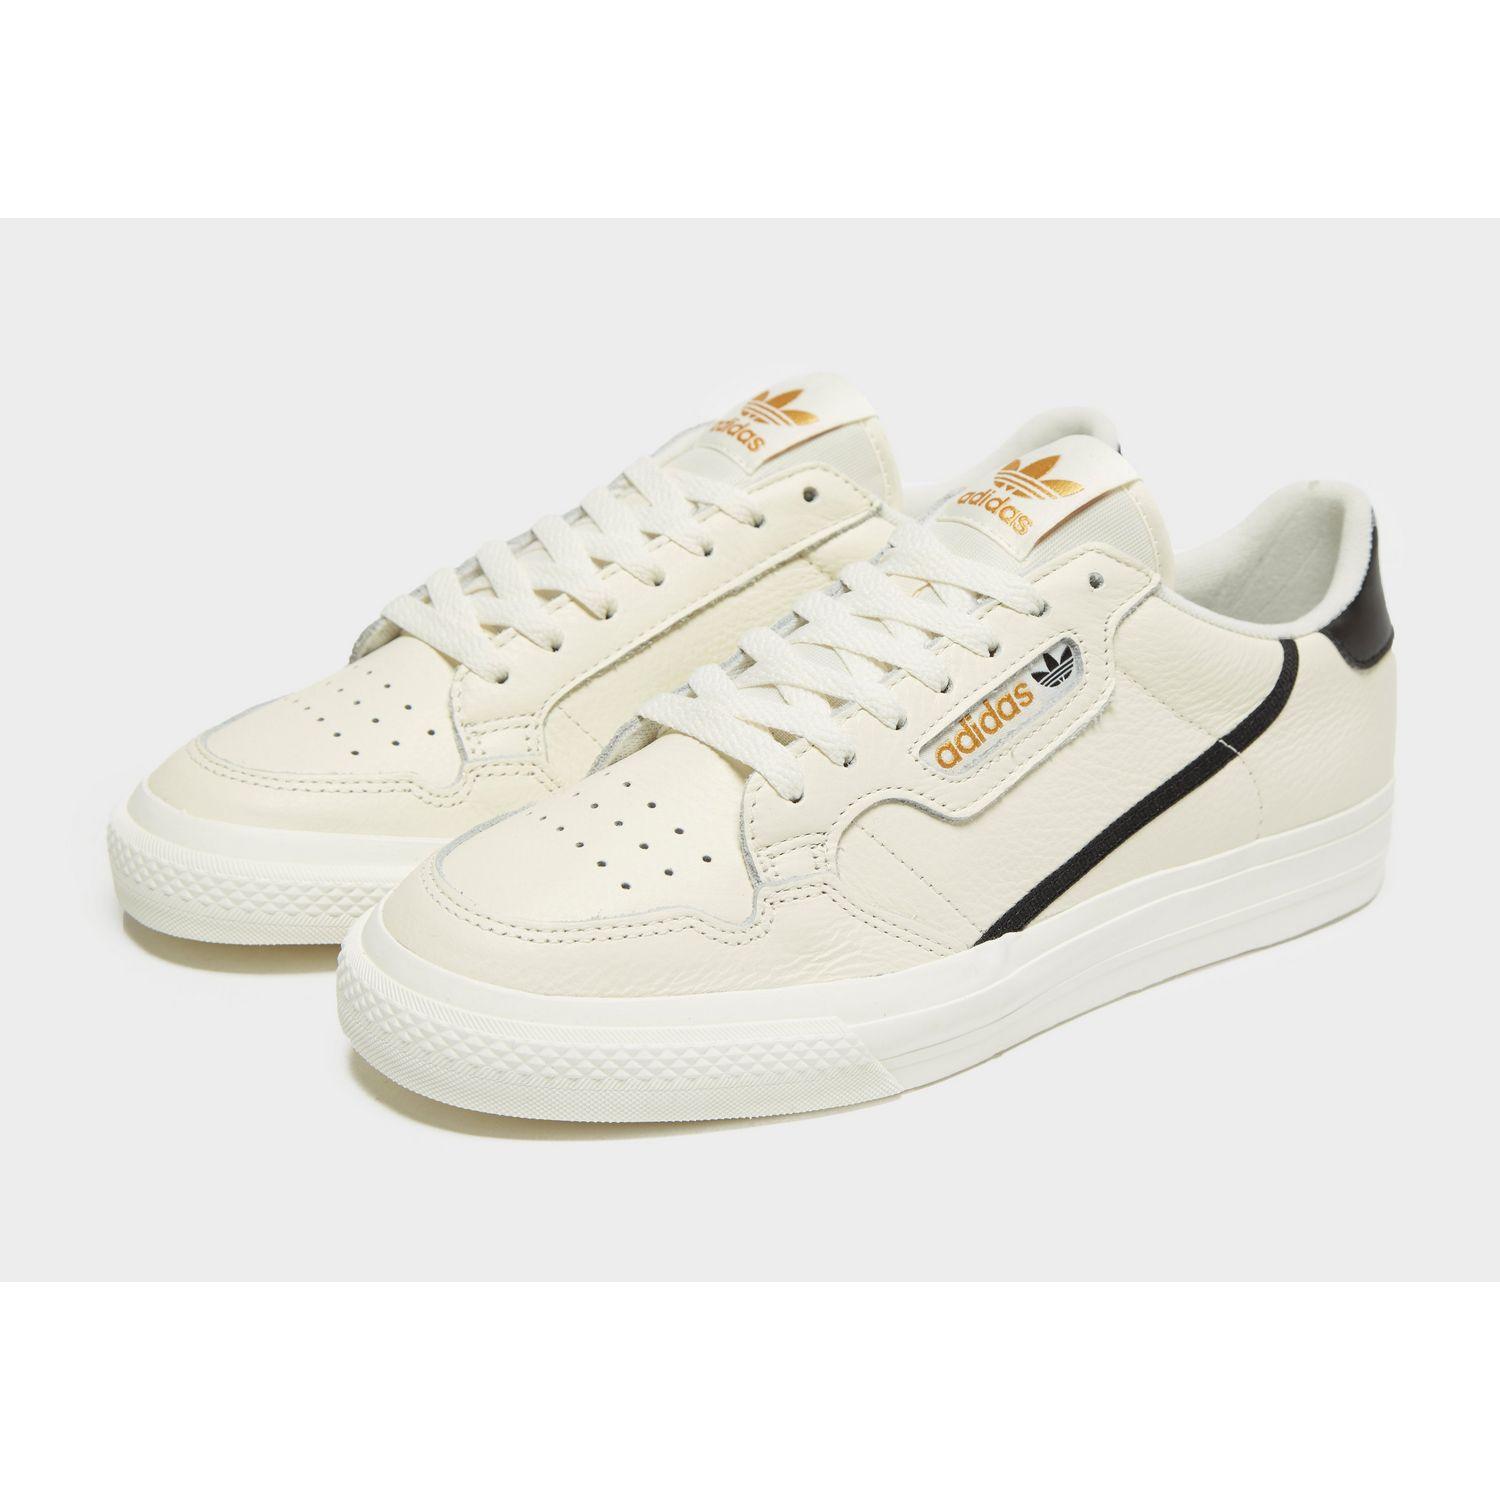 adidas continental 80 vulc white Promotions